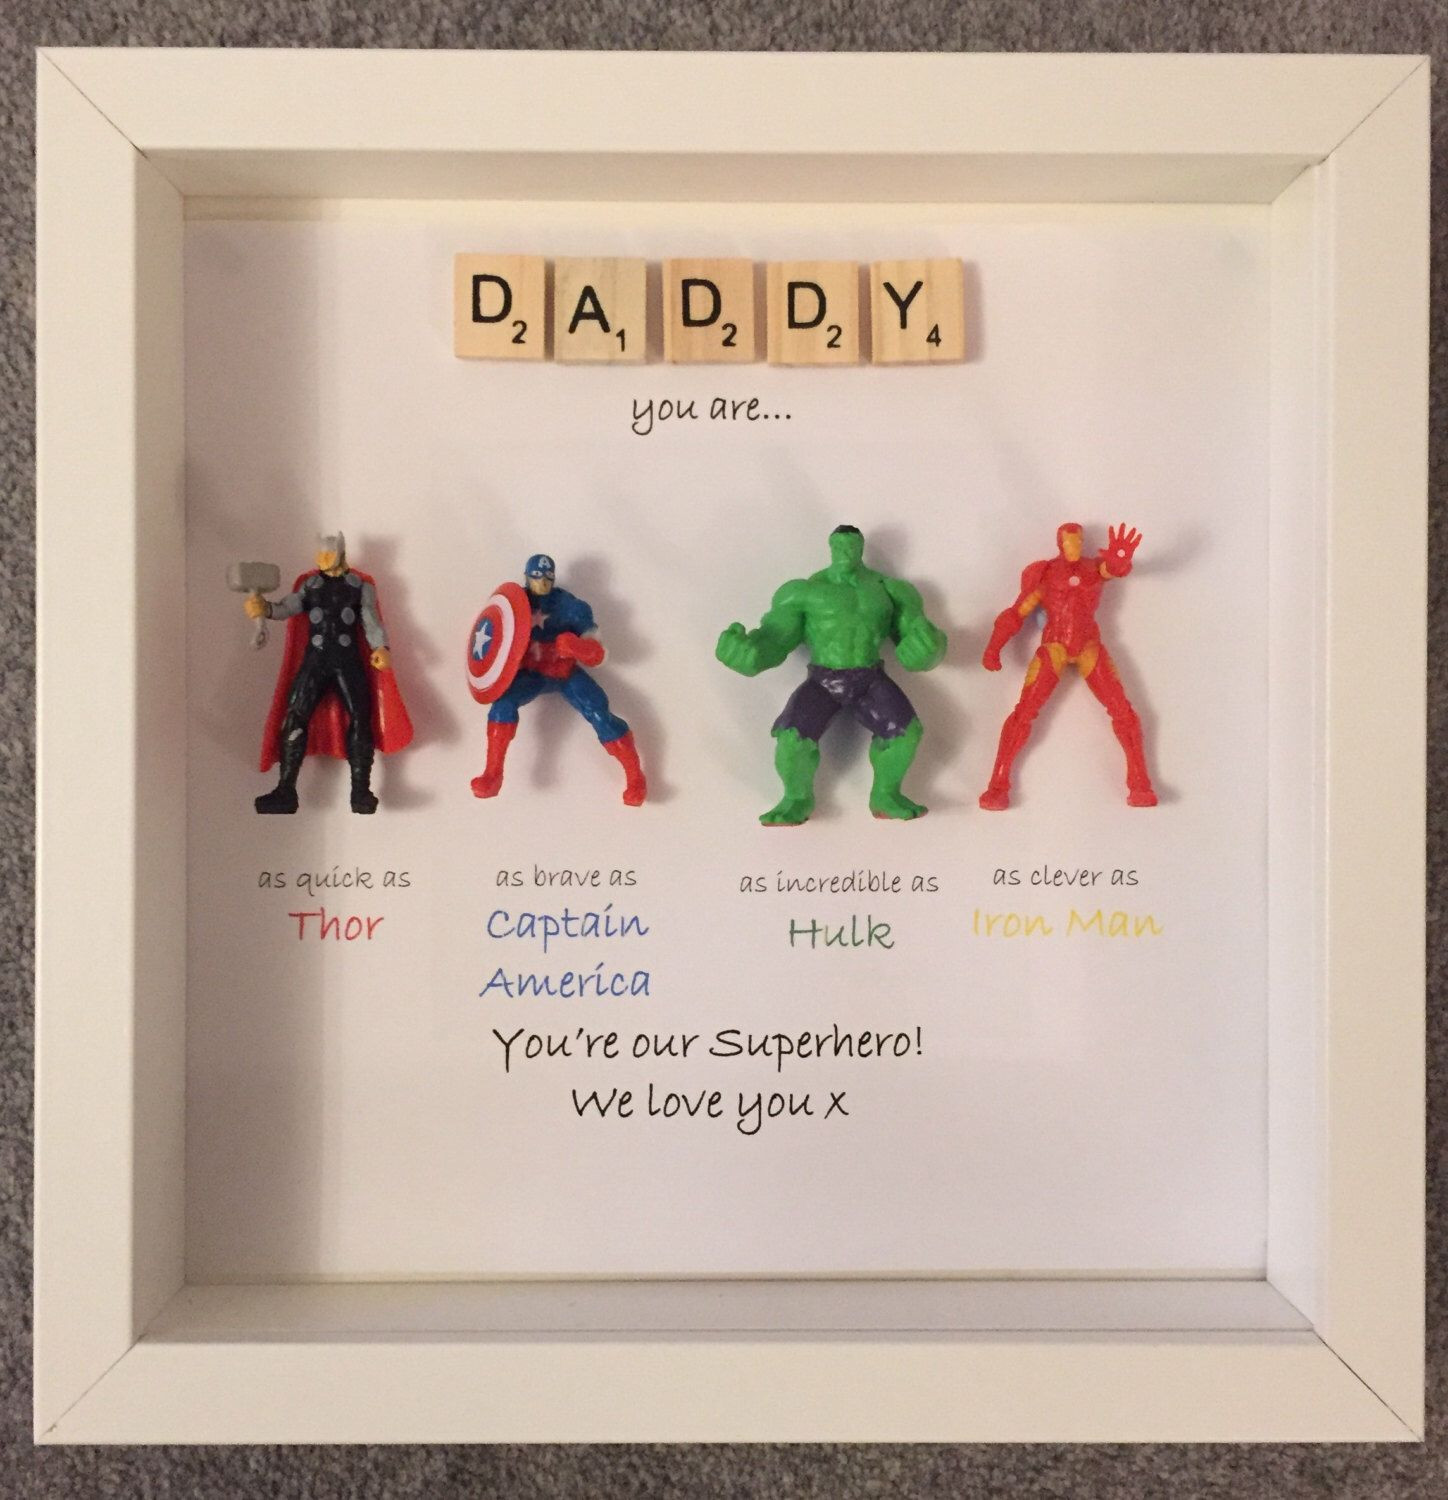 Birthday Gift Ideas For Dad From Son
 Avengers Superhero figures frame t Ideal for dad